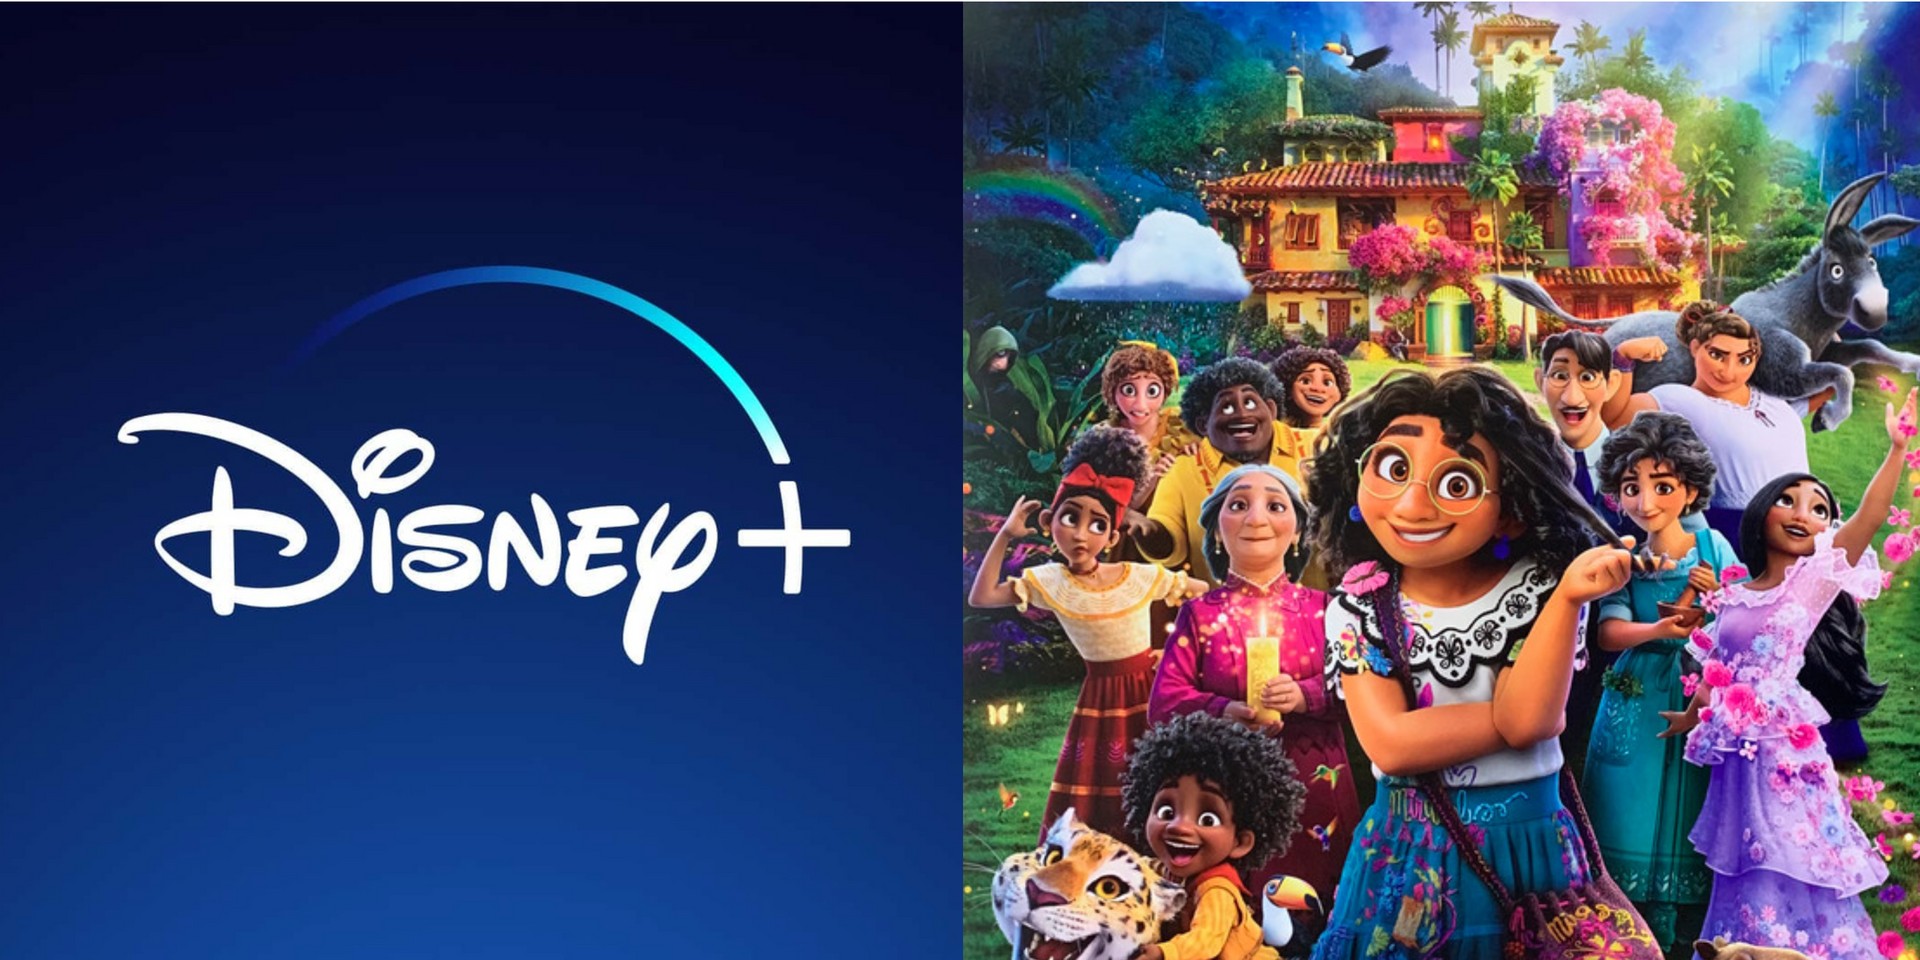 Disney+ to premiere holiday animated film 'Encanto' this December